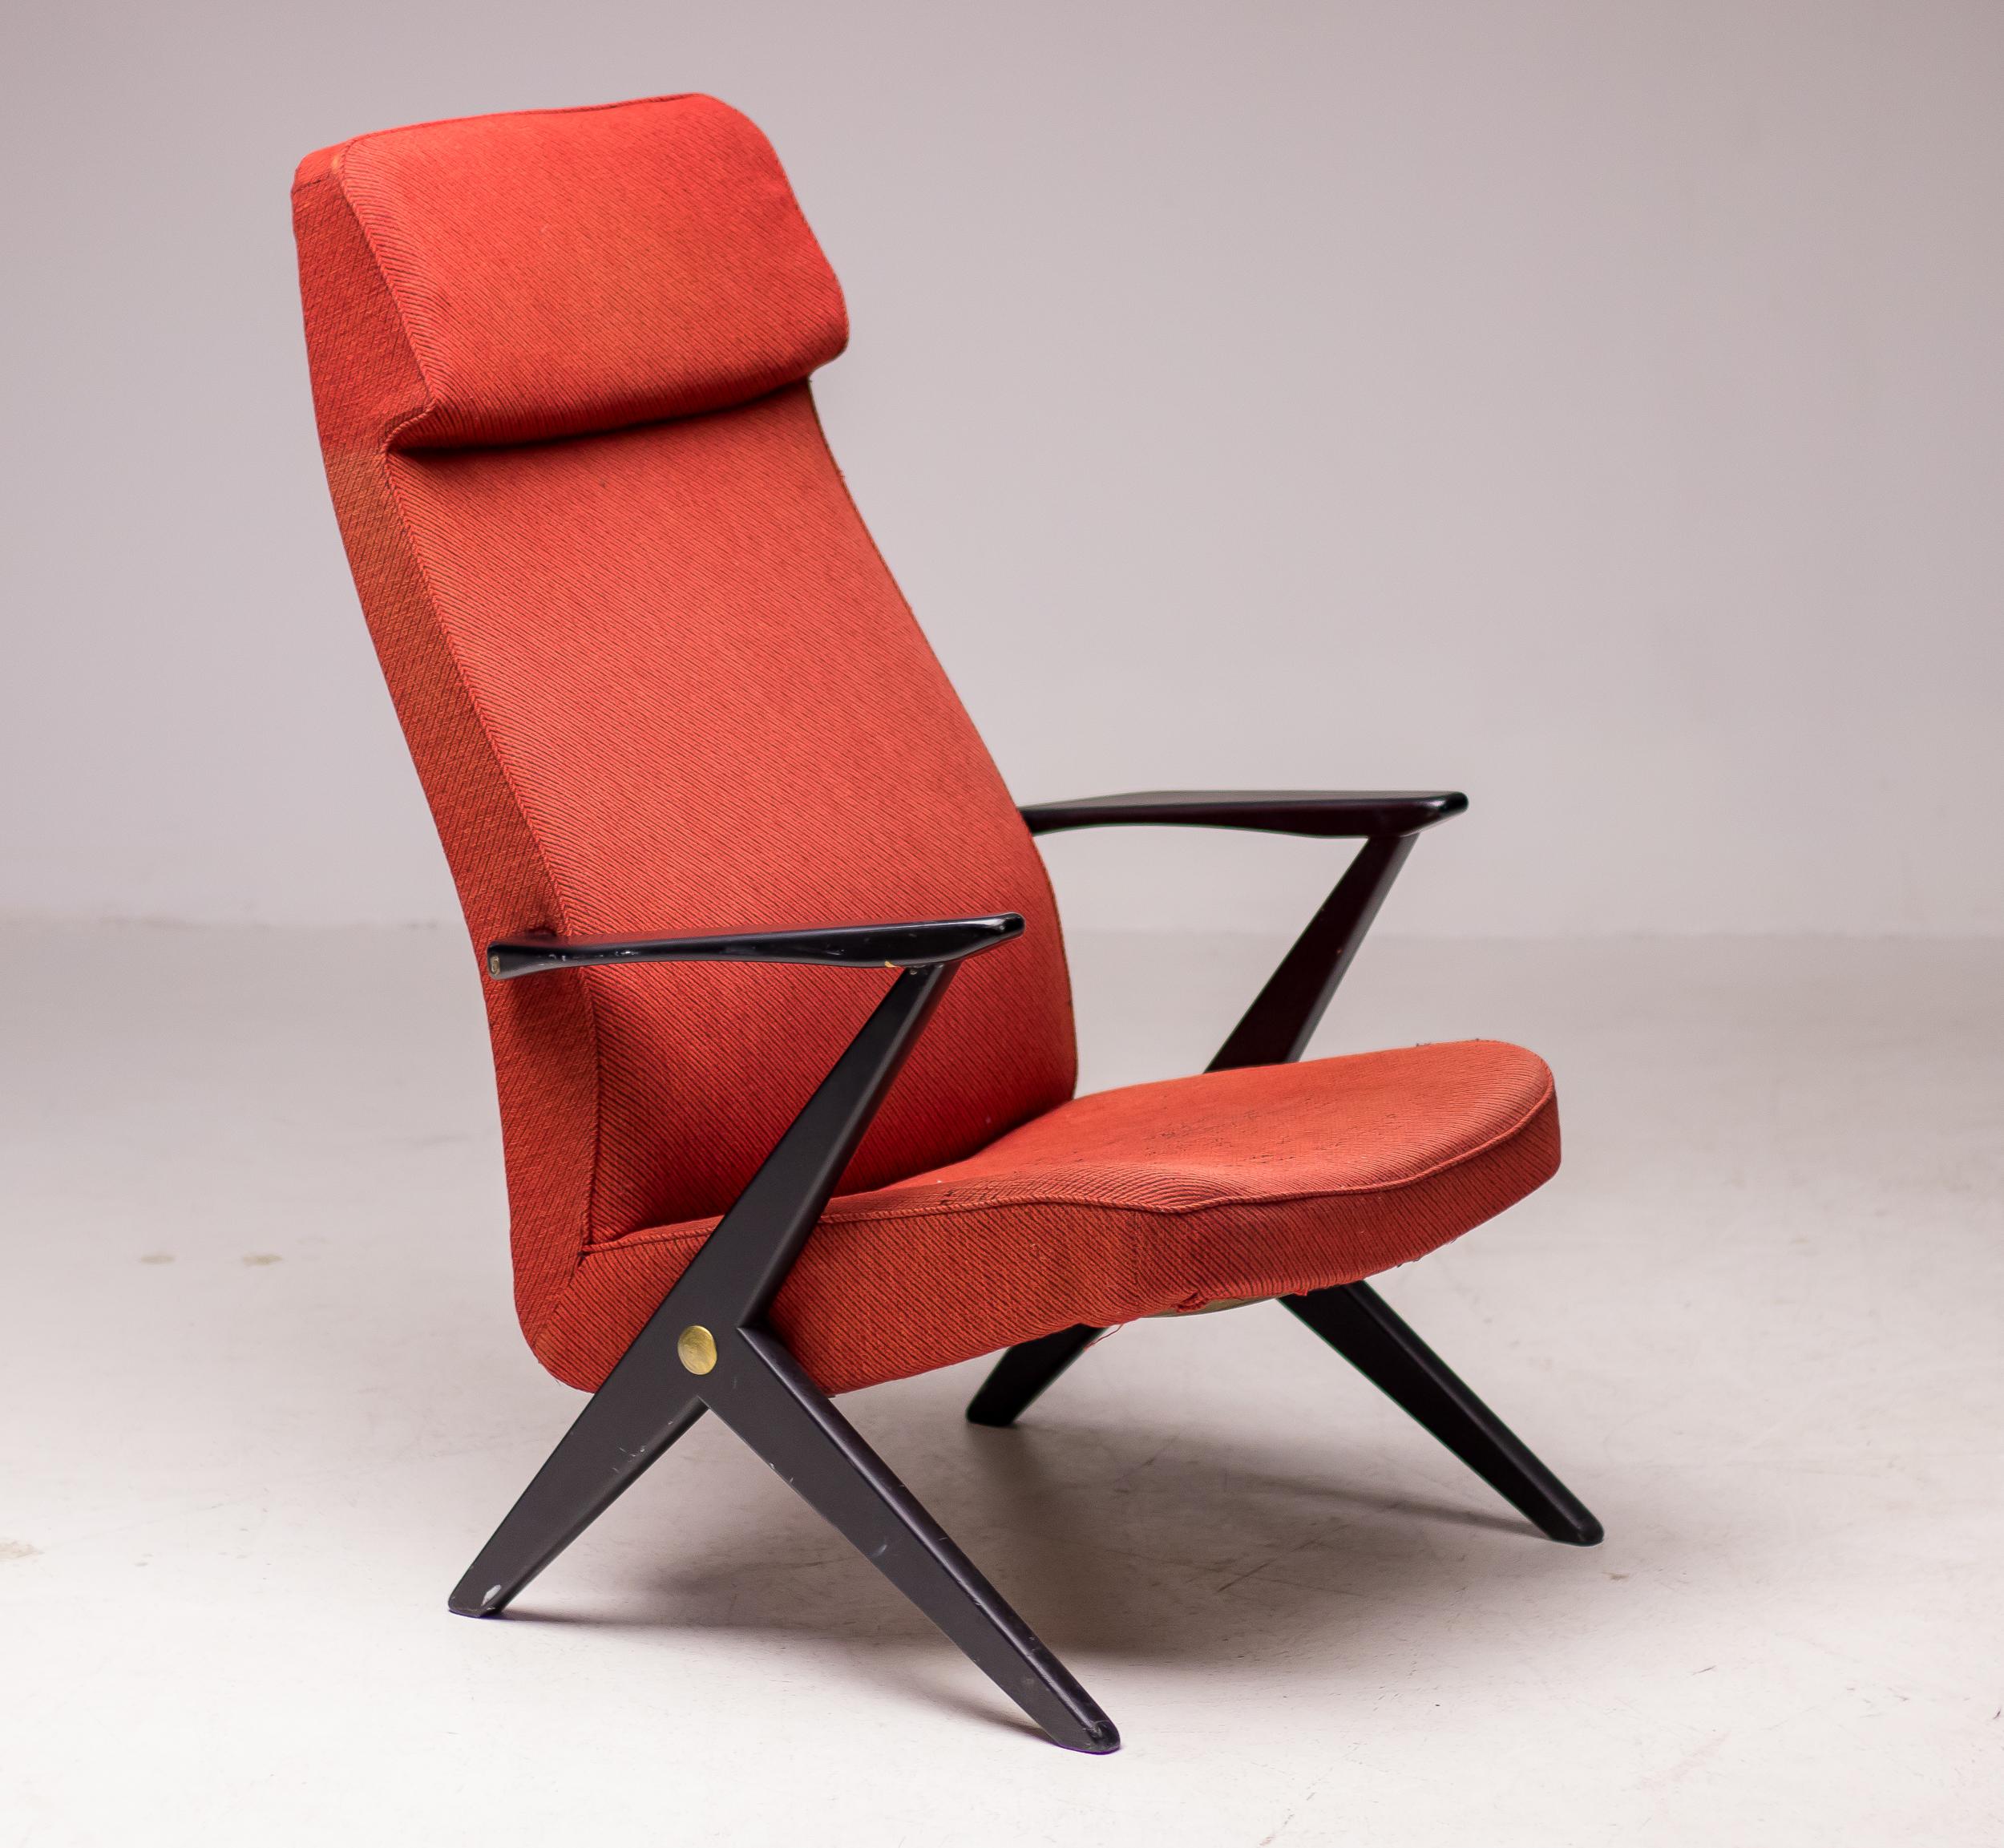 Black lacquered beech high back “Triva” chair designed by Bengt Ruda and made by Nordiska Kompaniet.
Original red fabric in fair vintage condition with some wear, foam inside recently replaced.
Marked with Nordiska Kompaniet label